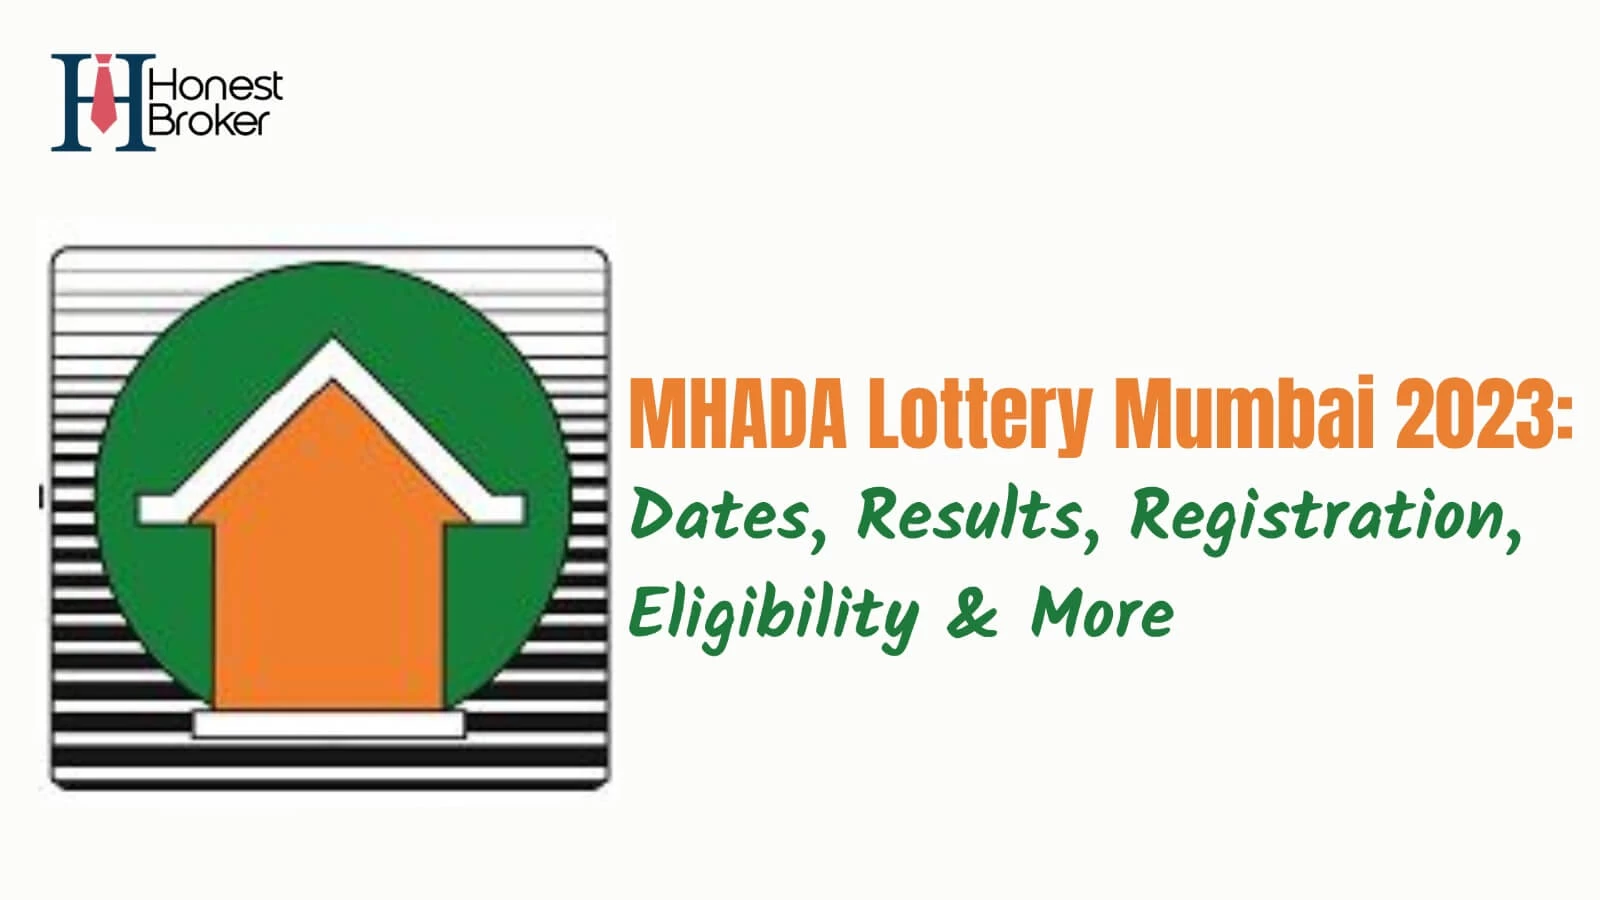 MHADA Lottery 2023: Dates, Results, Registration, Eligibility & More